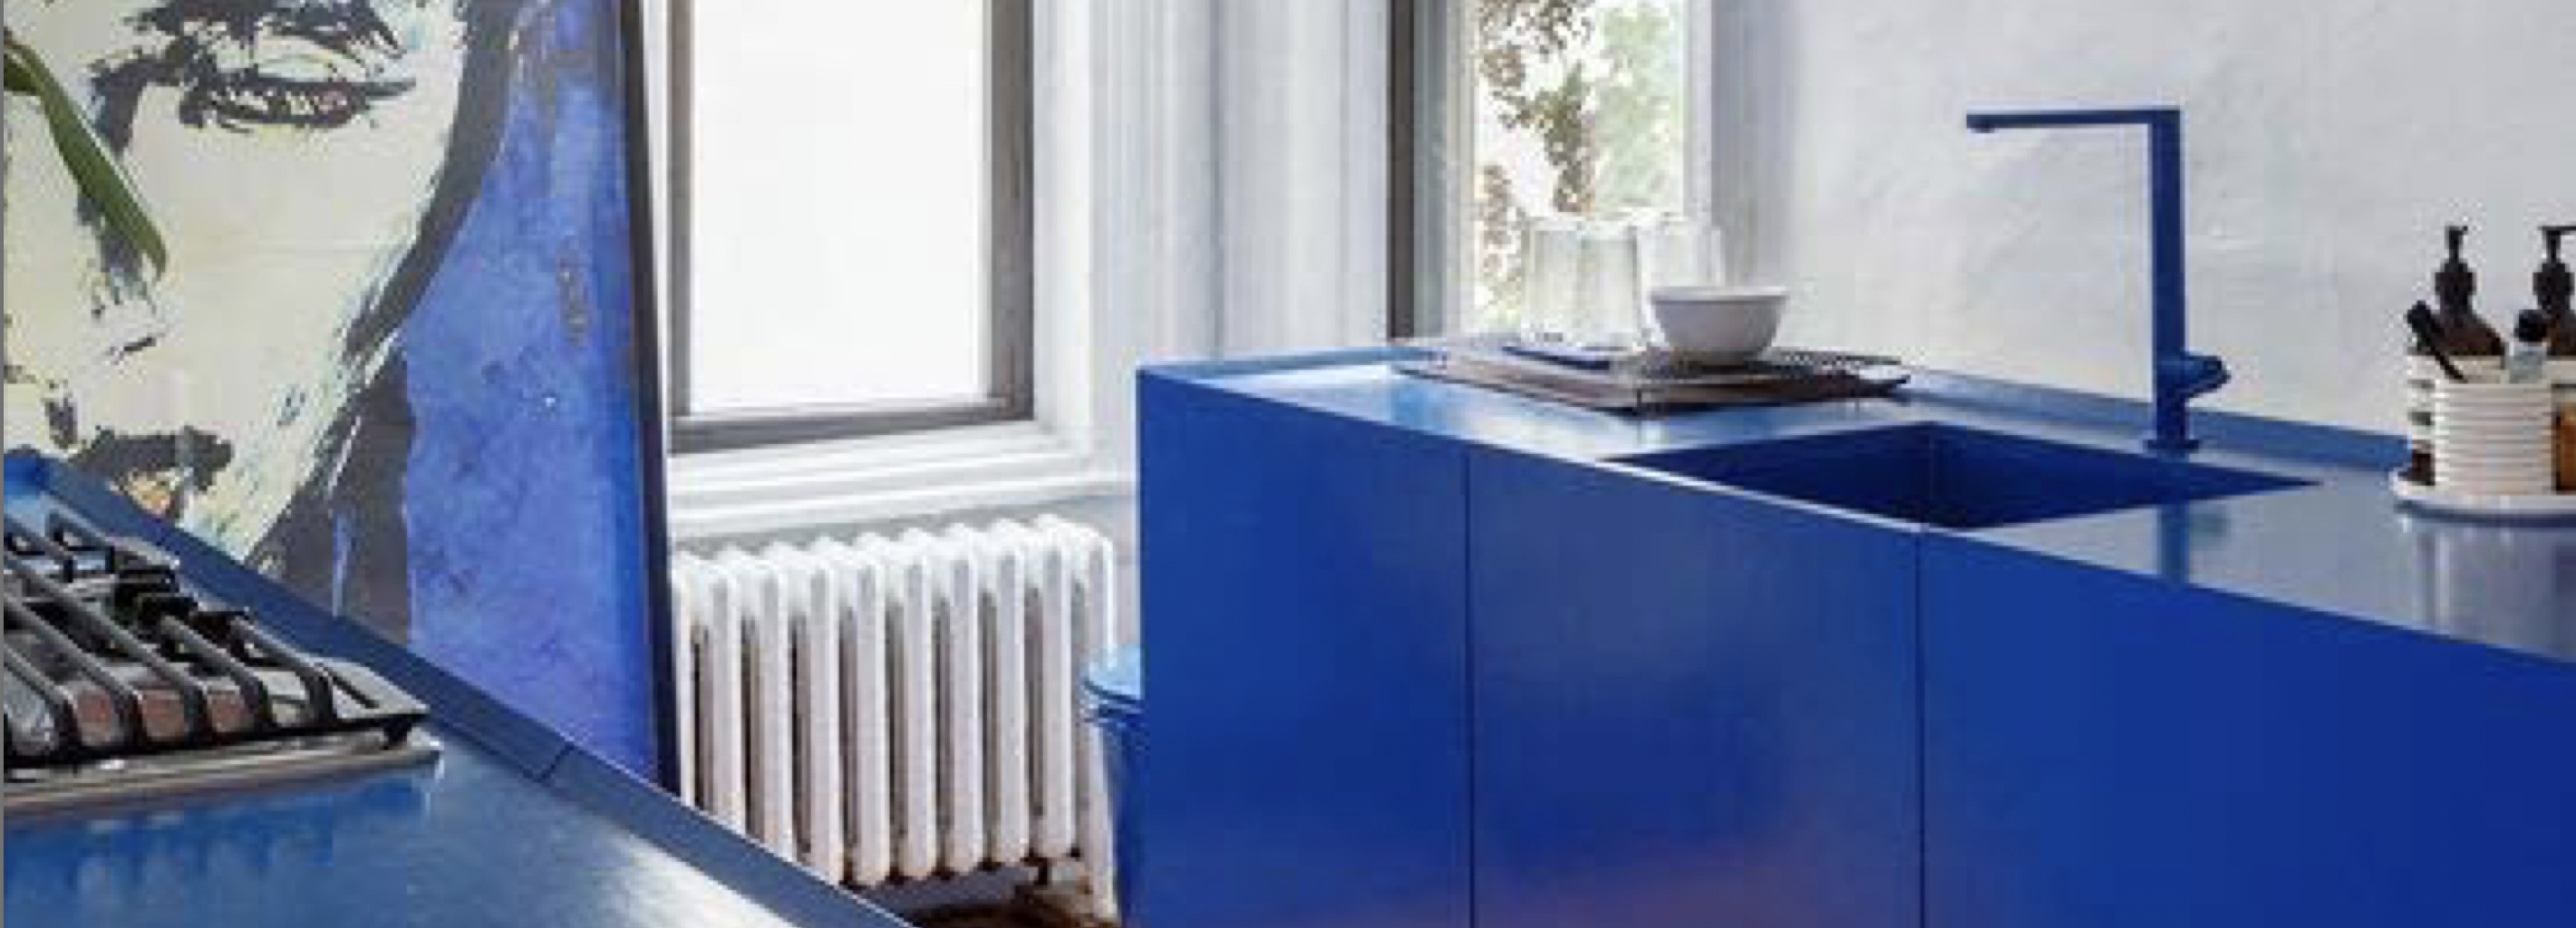 Blue is the new kitchen trend